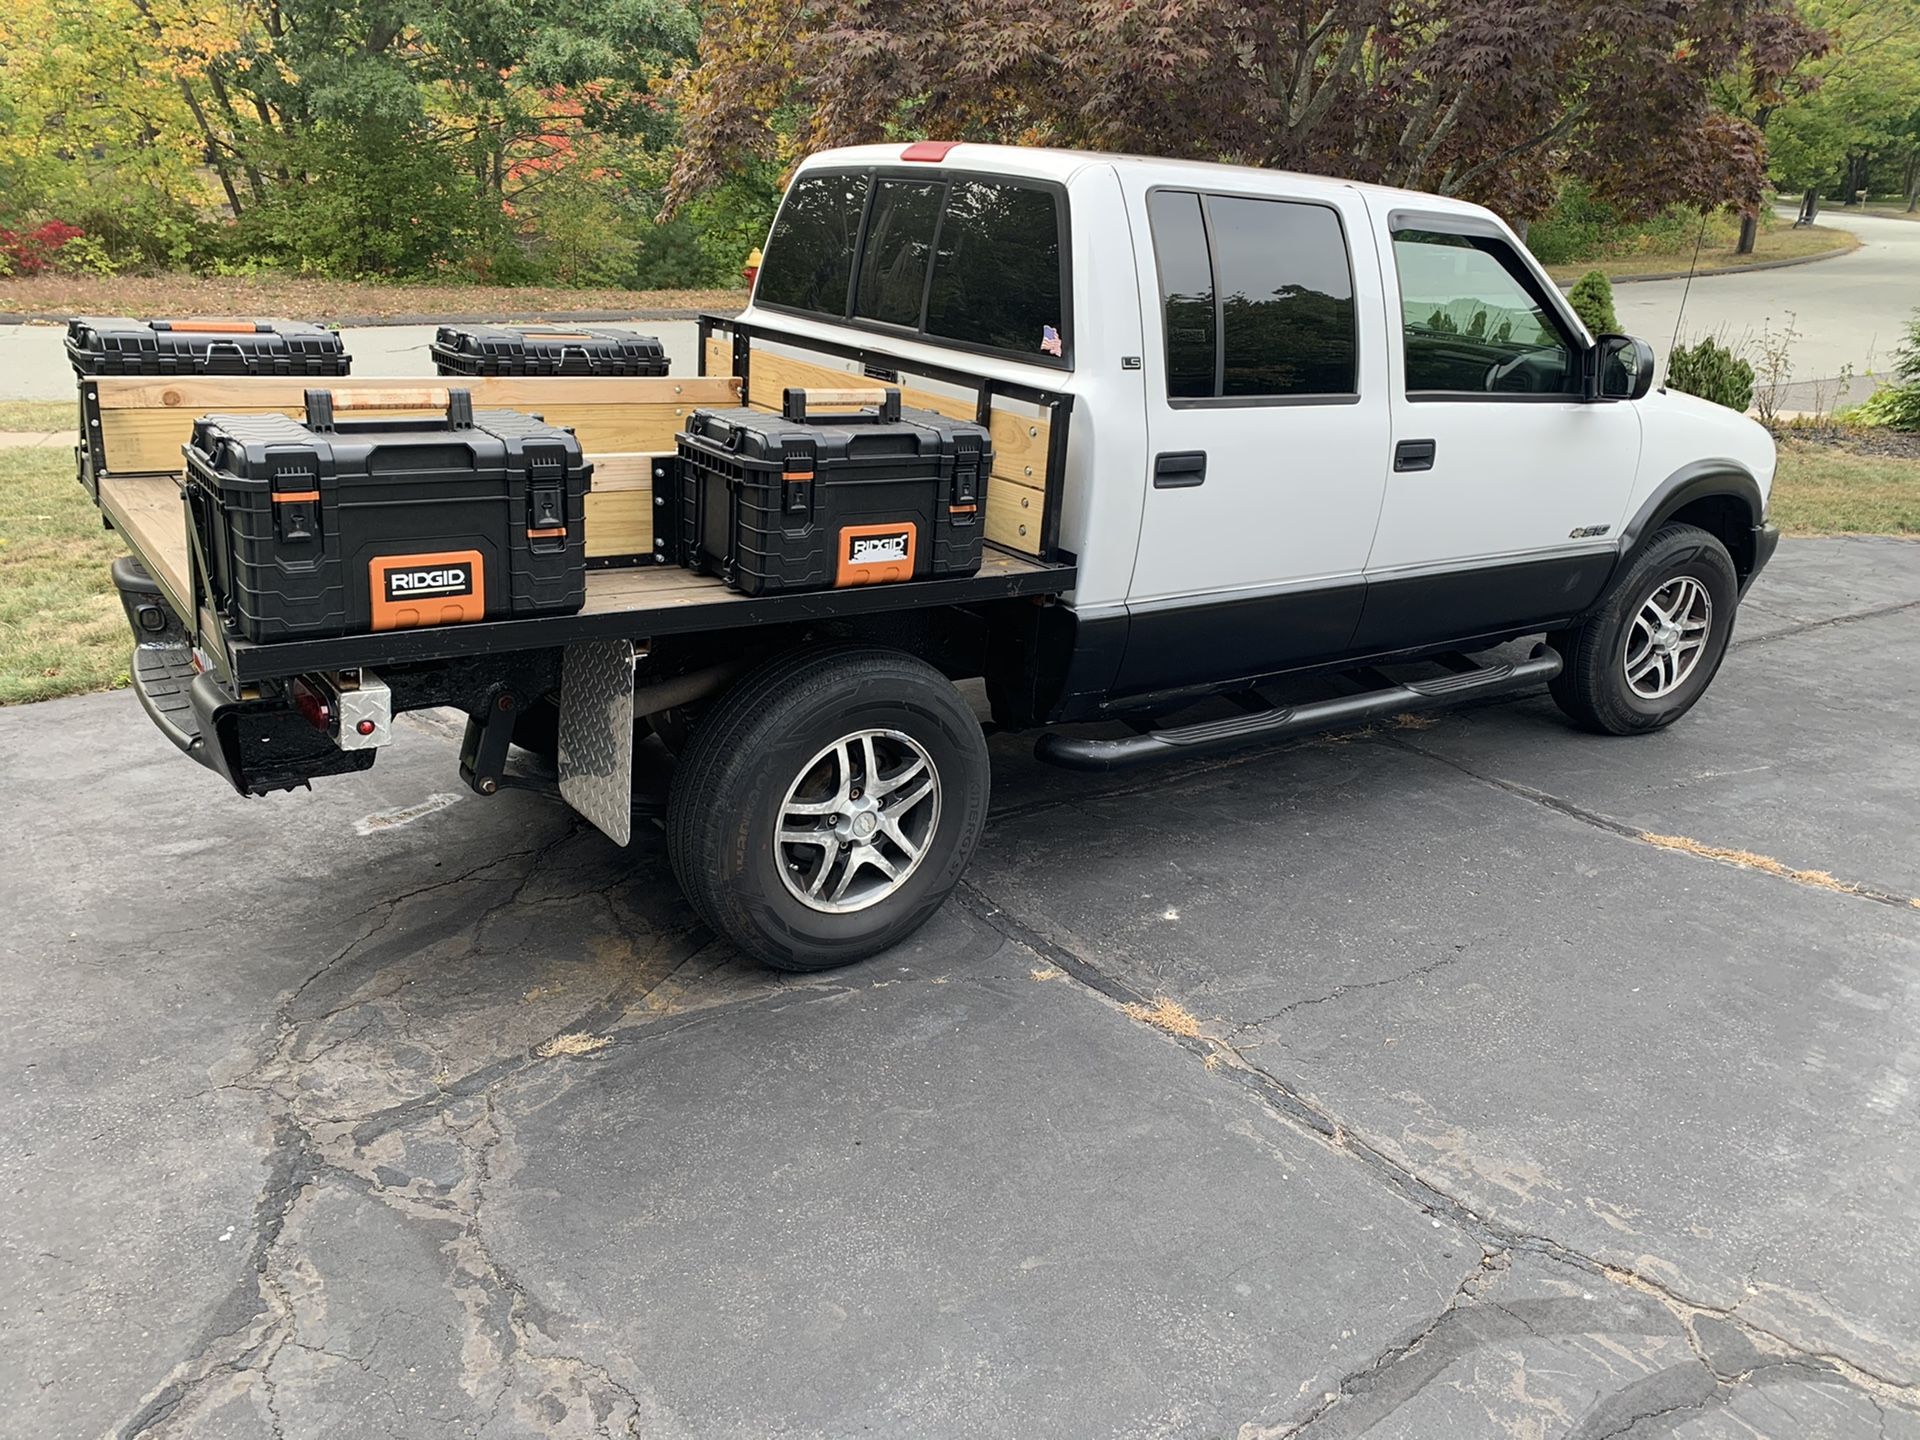 2003 CHEVY S10 FLATBED WITH 4 RIDGID BOXES 4x4